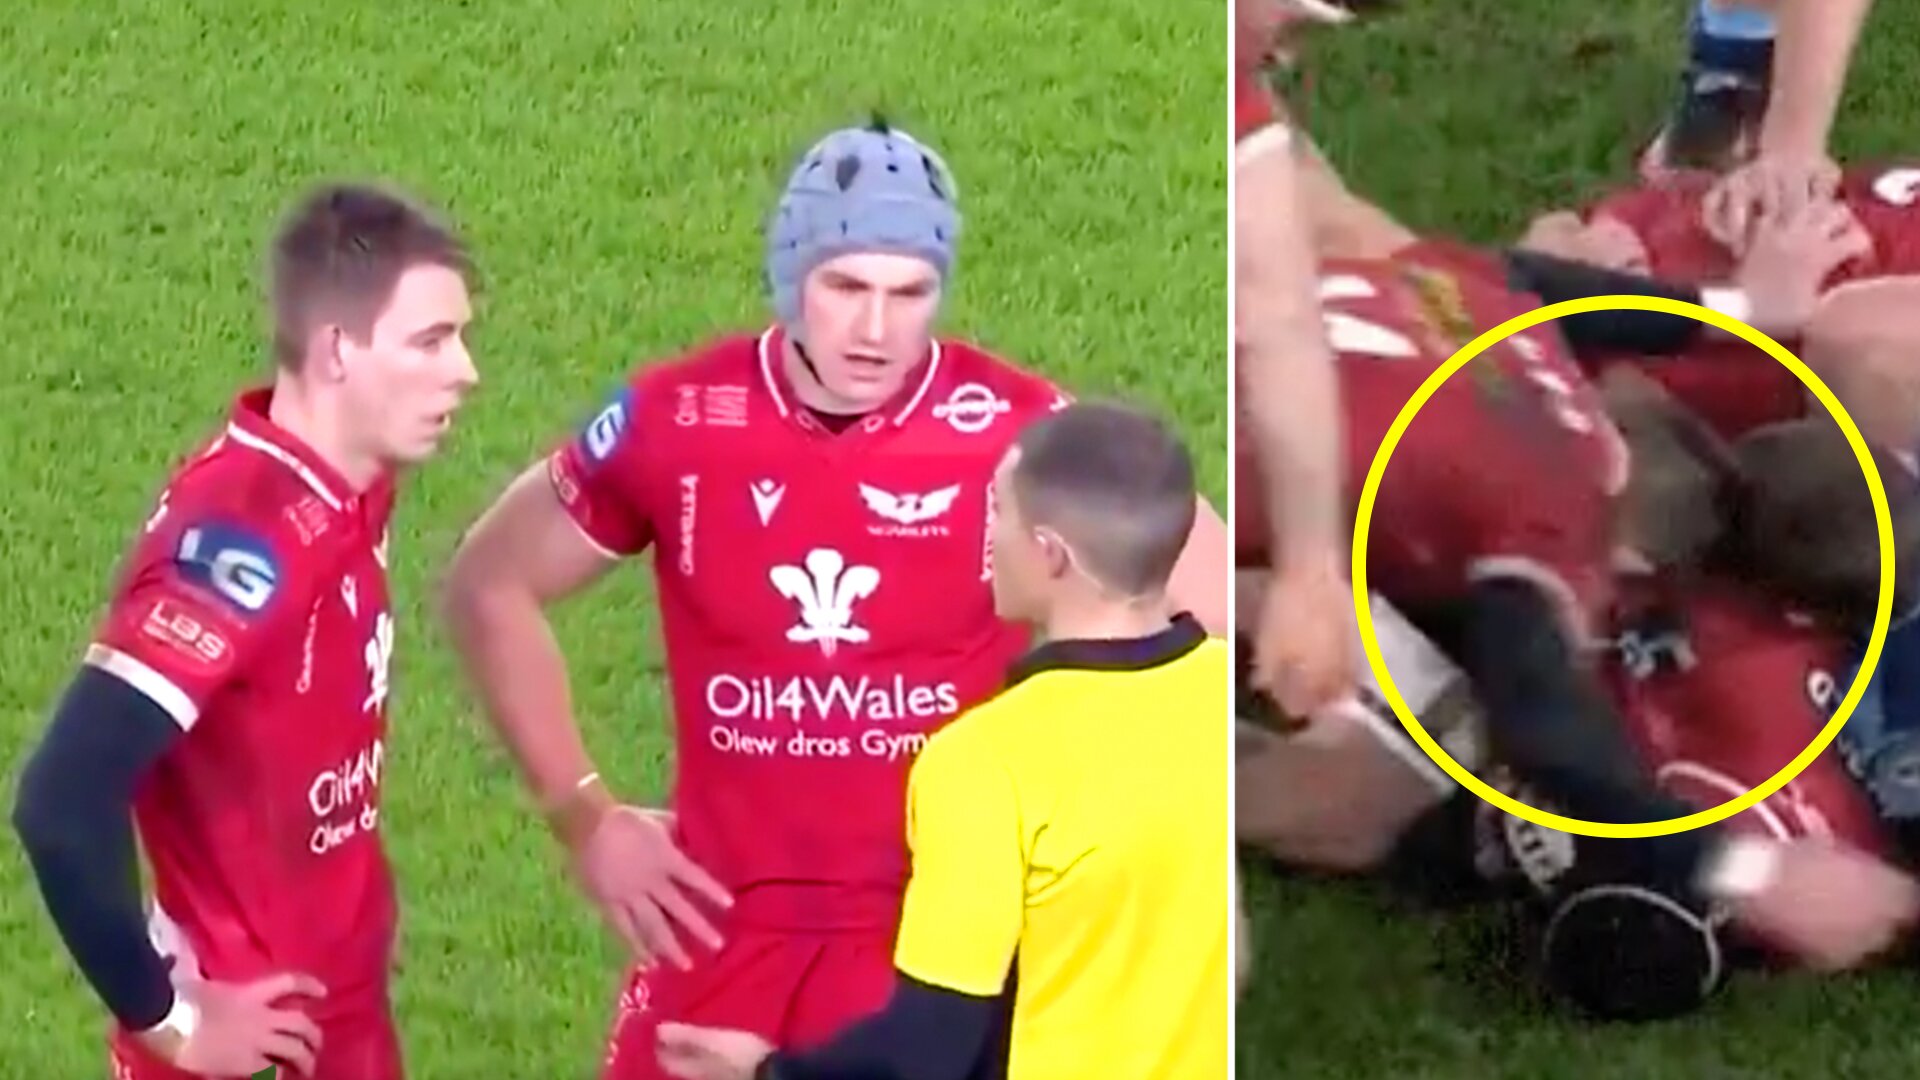 Outrage at Liam Williams after his disrespectful backchat to the referee